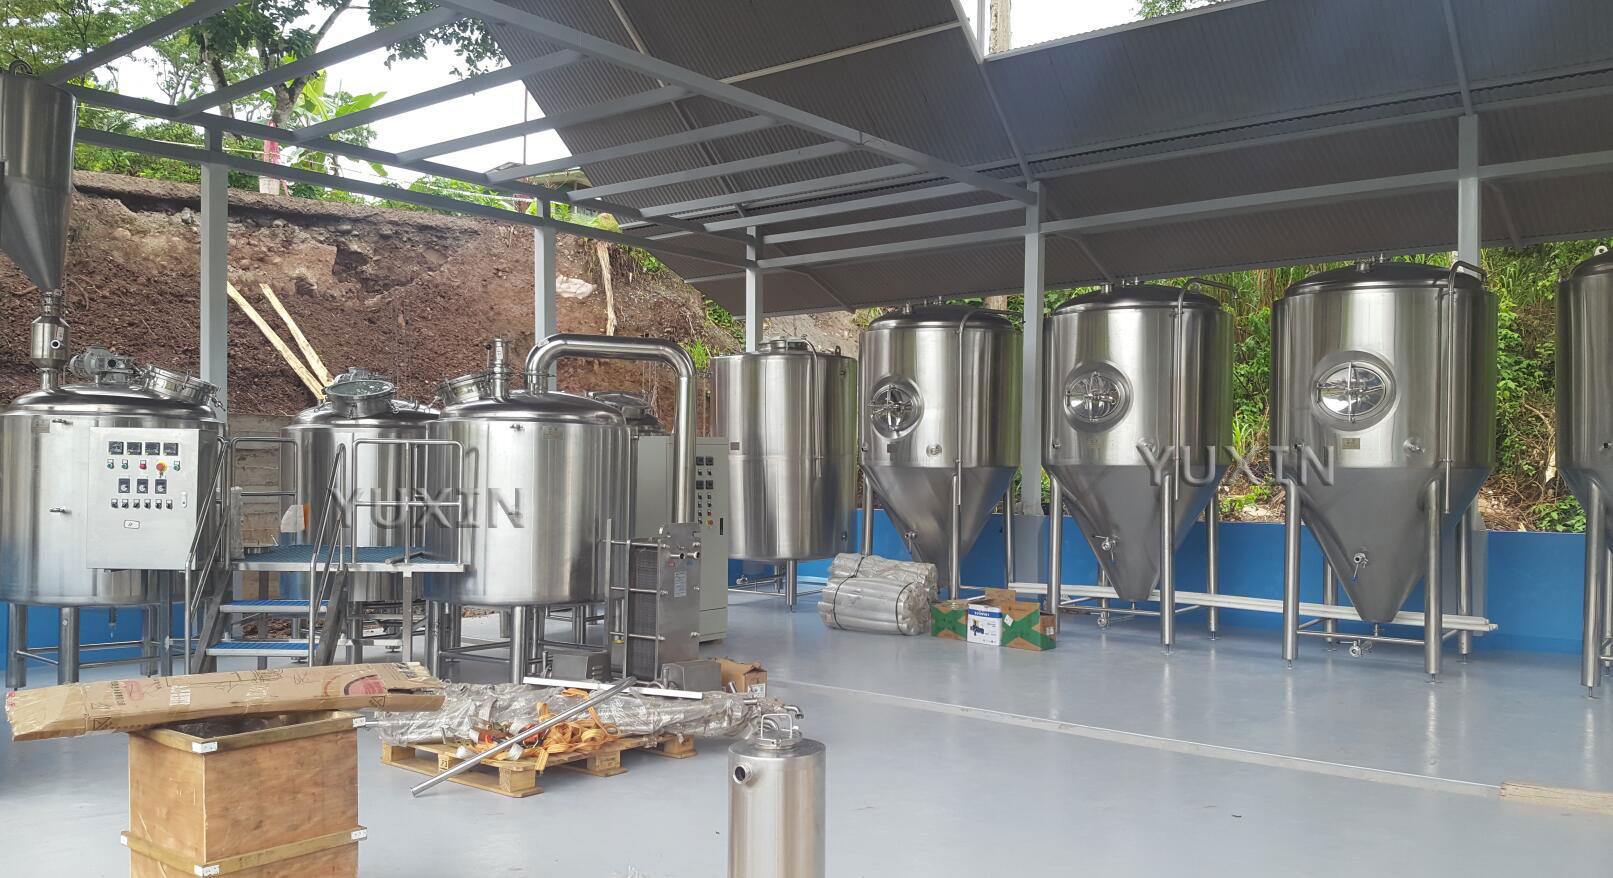 1000L Brewery installed in Latin America